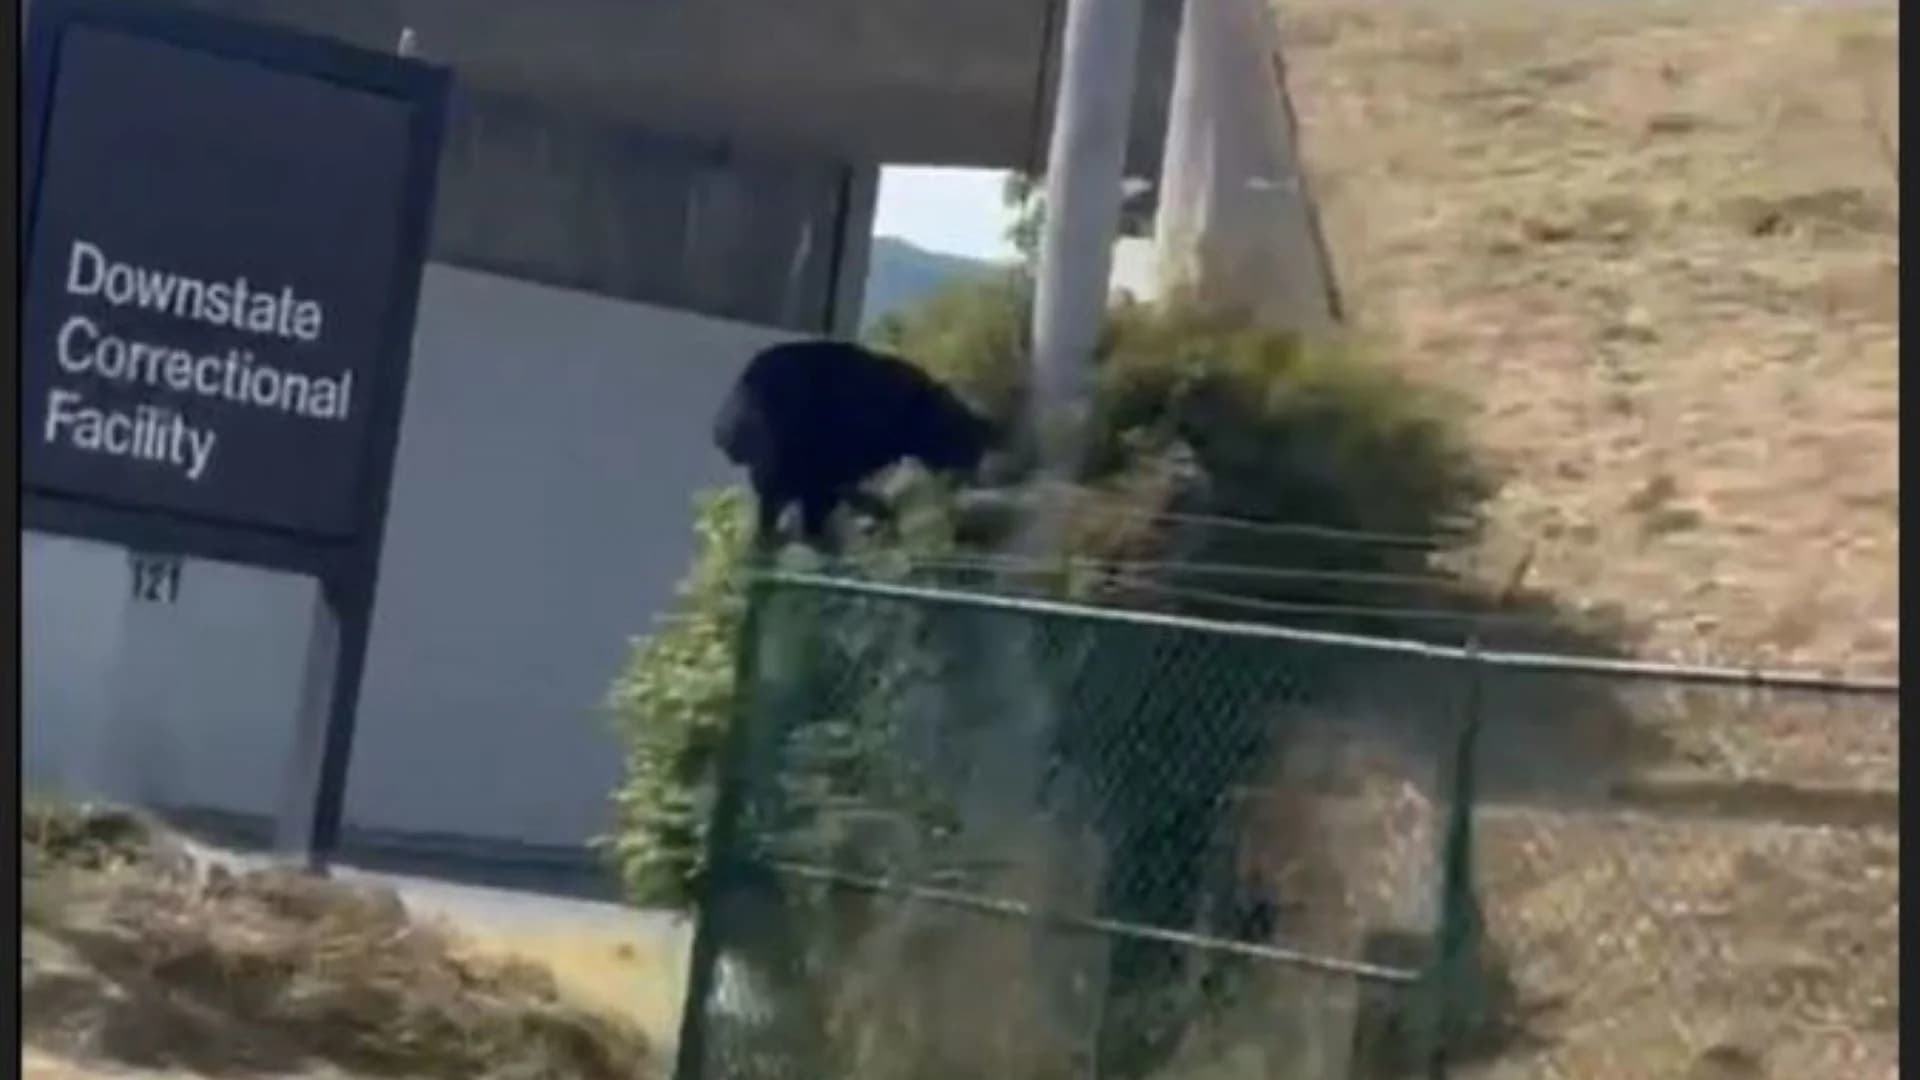 Break-in: Black bear spotted trying to break into Downstate Correctional Facility